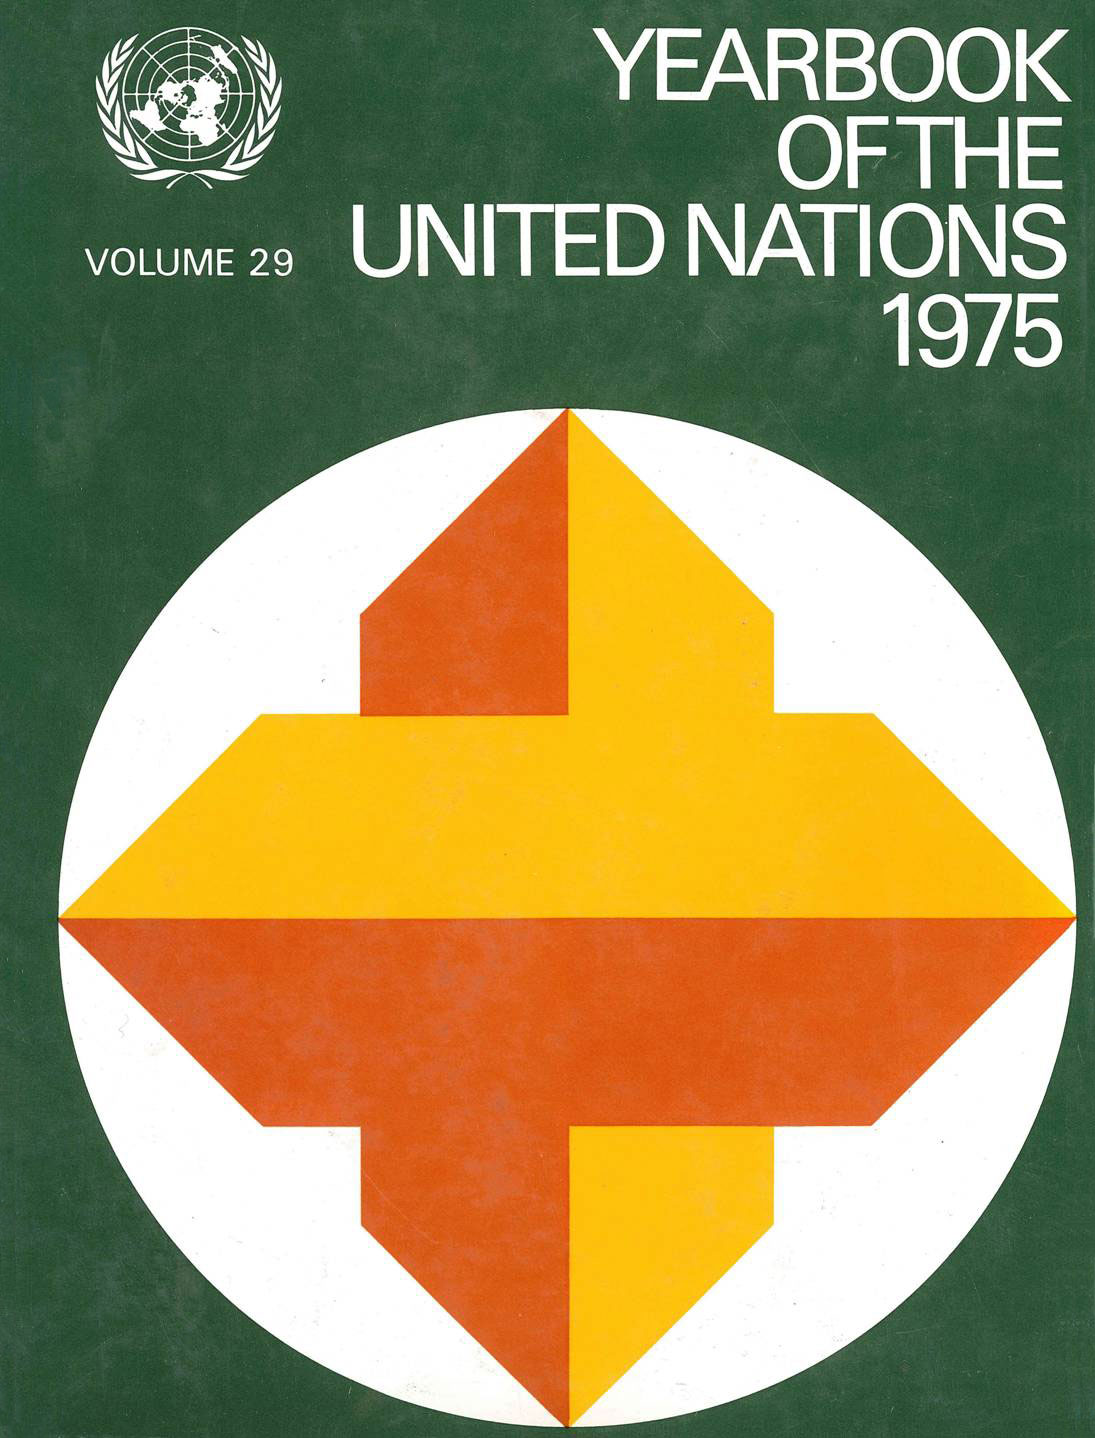 image of Yearbook of the United Nations 1975